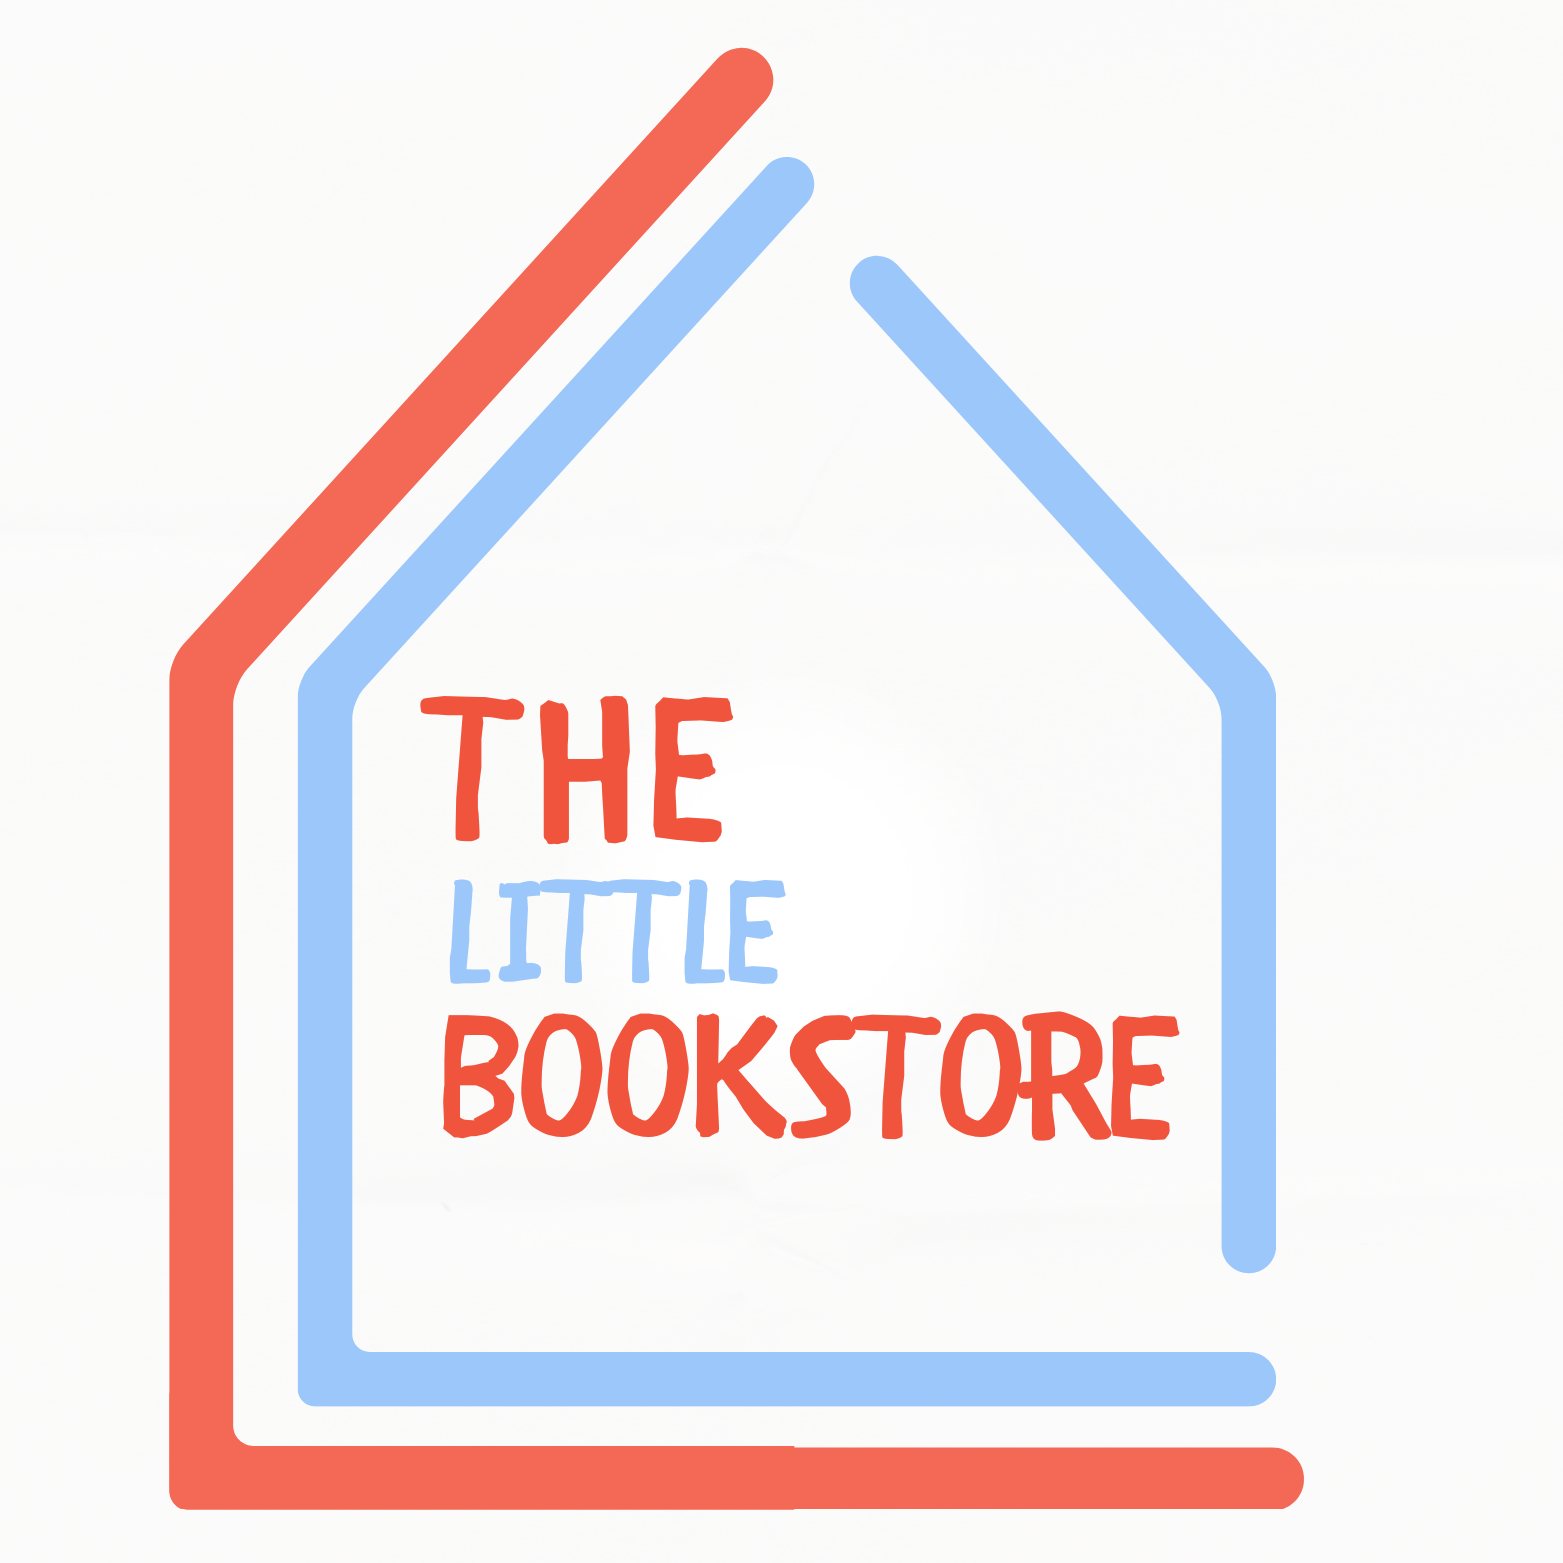 The Little Bookstore